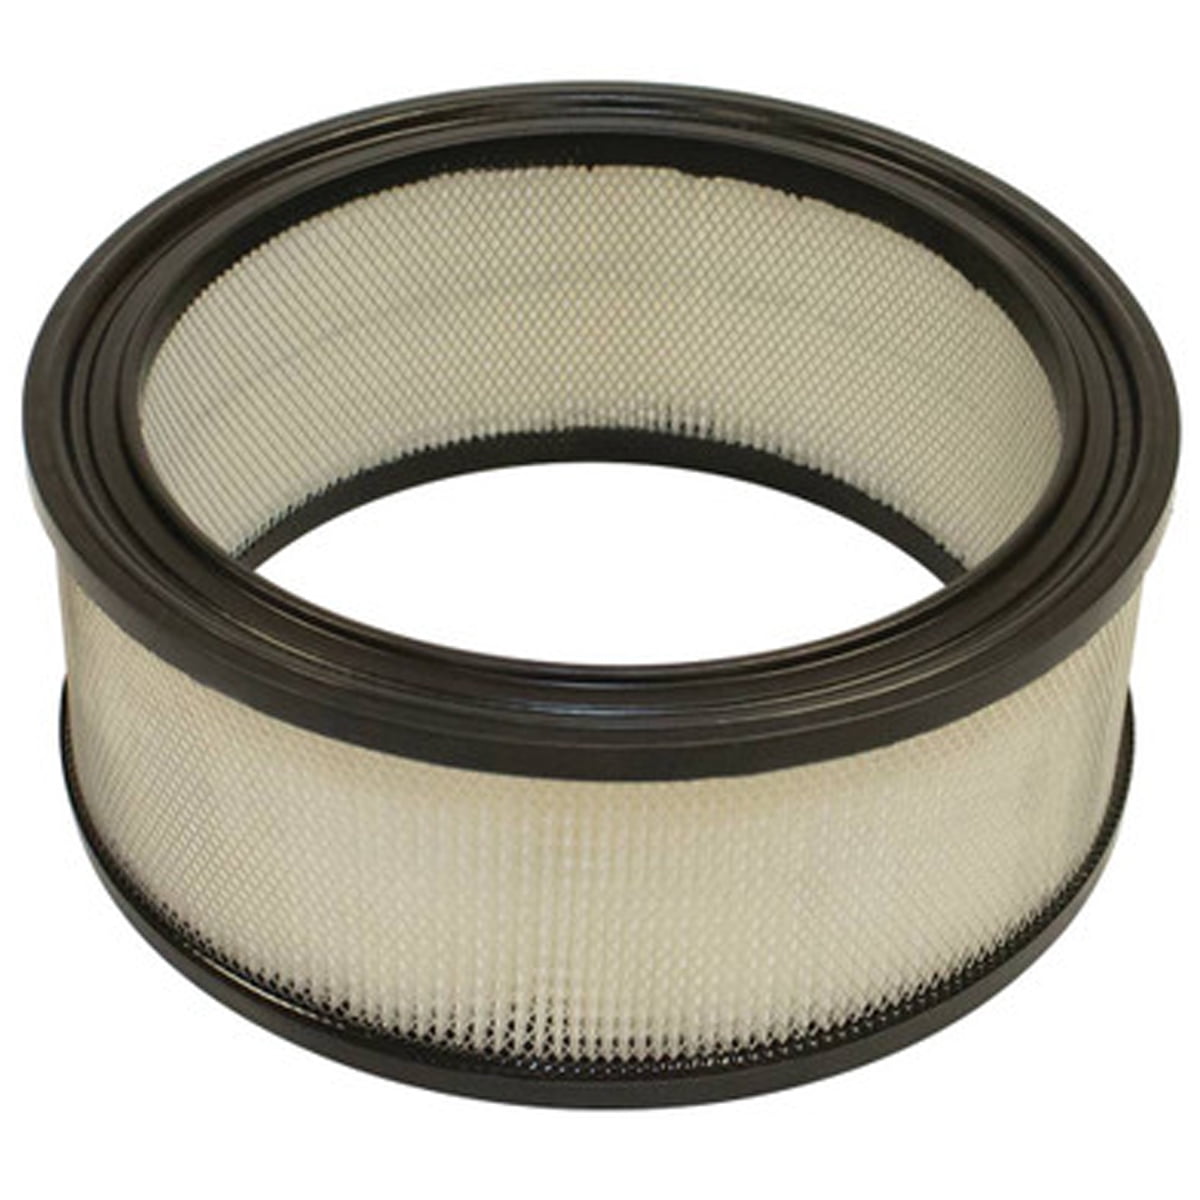 Podoy 24 083 03-S Air Filter for Compatible with Kohler 24-083-05S Pre-filter 24-083-03 CH18 CH20 CH22 CH23 CH25 CV17 CV18 CV19 CV20 CV22 CV22S CV23 Engine Lawn Mower 